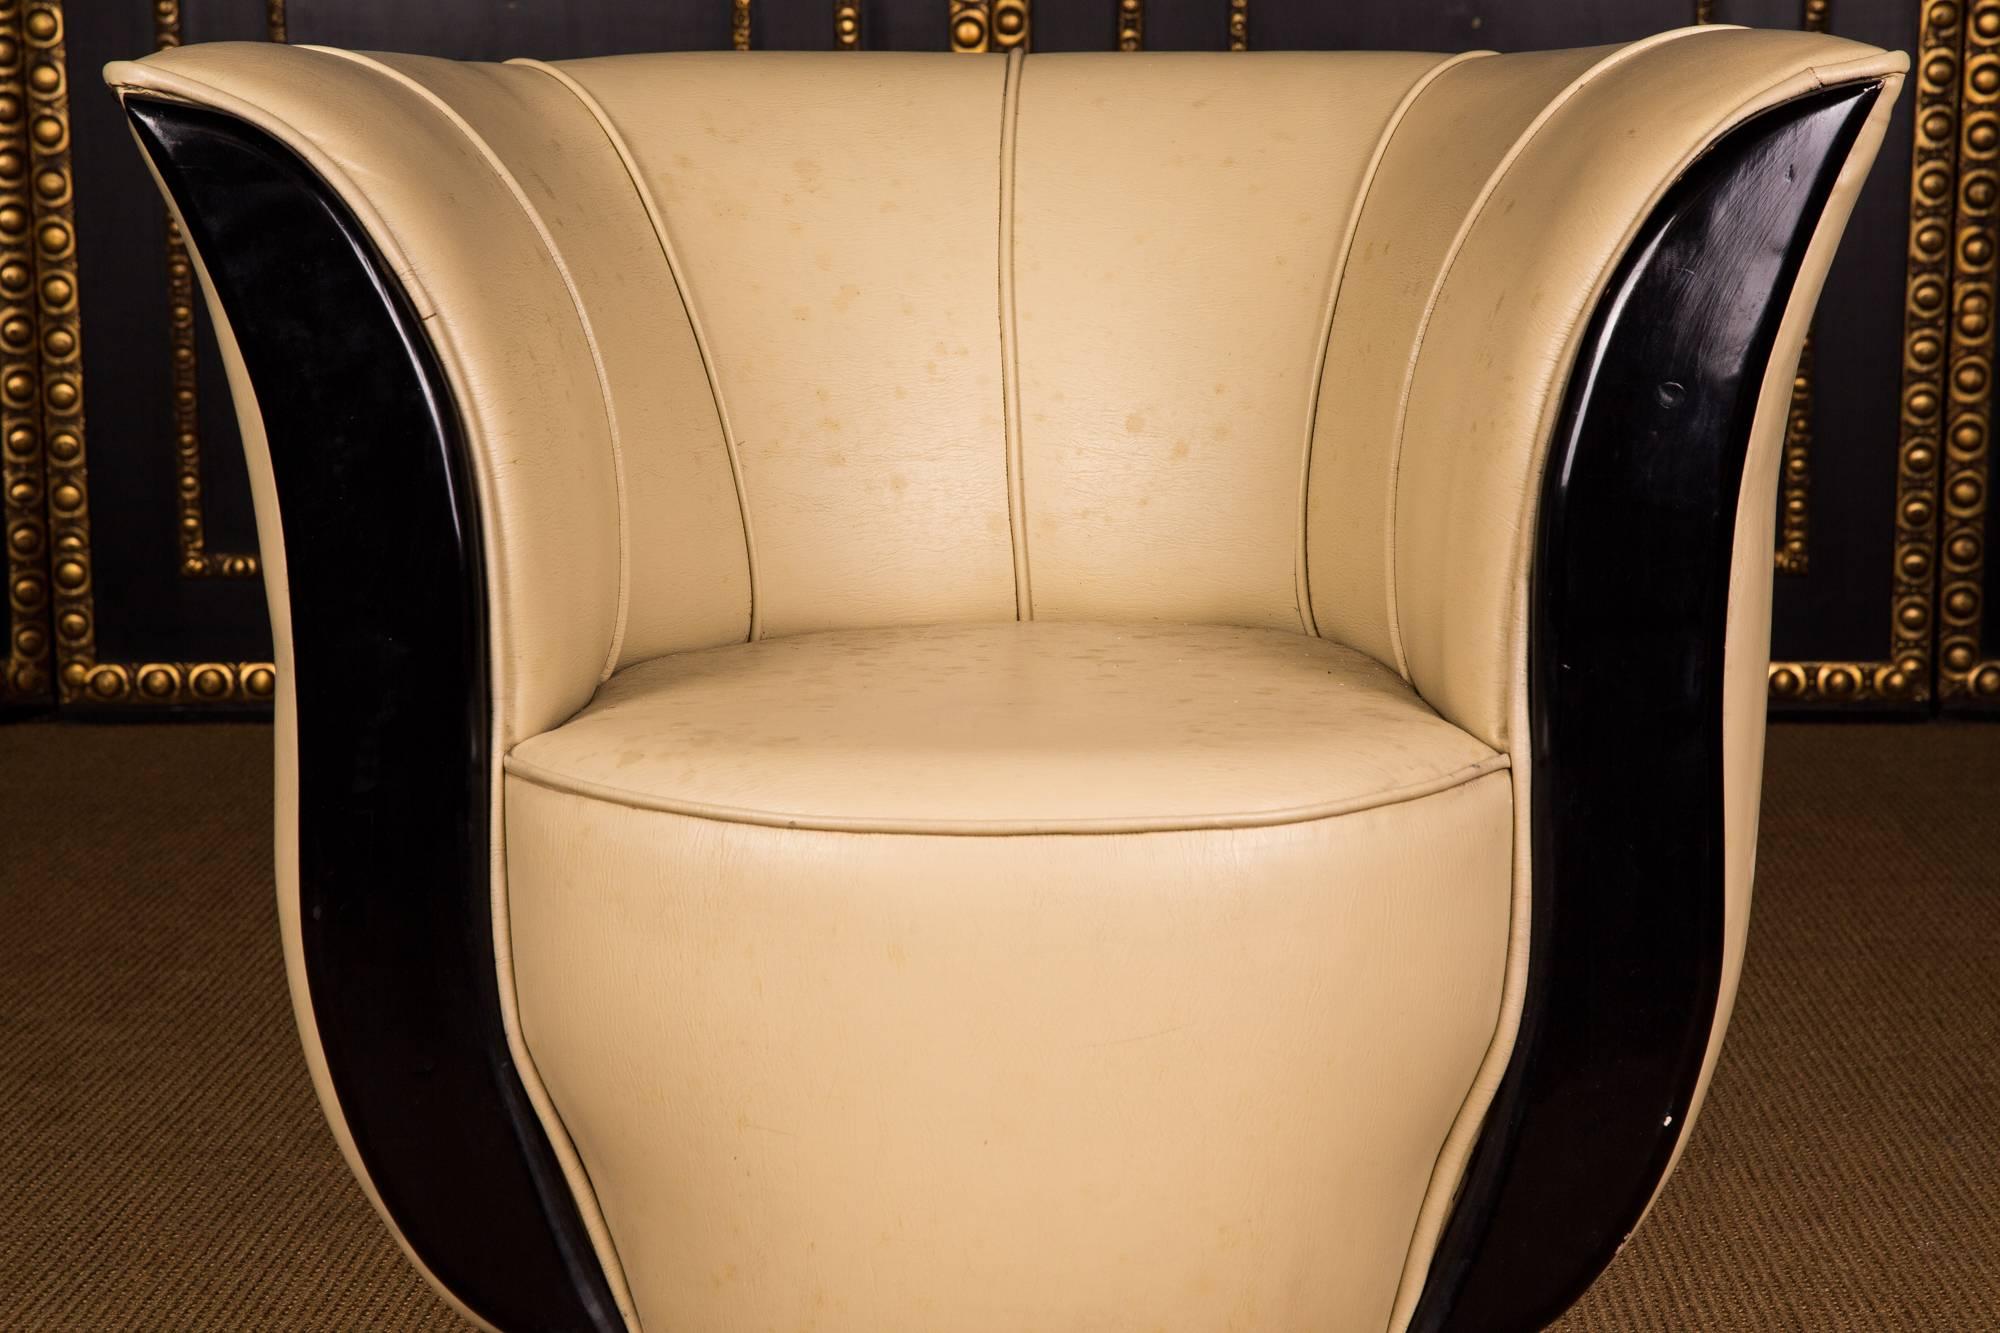 On round black base, high seating flanked by two blackened pointed wooden frames. Backrest leaning backwards. The leatherette is blotchy and must be changed or maybe you can clean it.